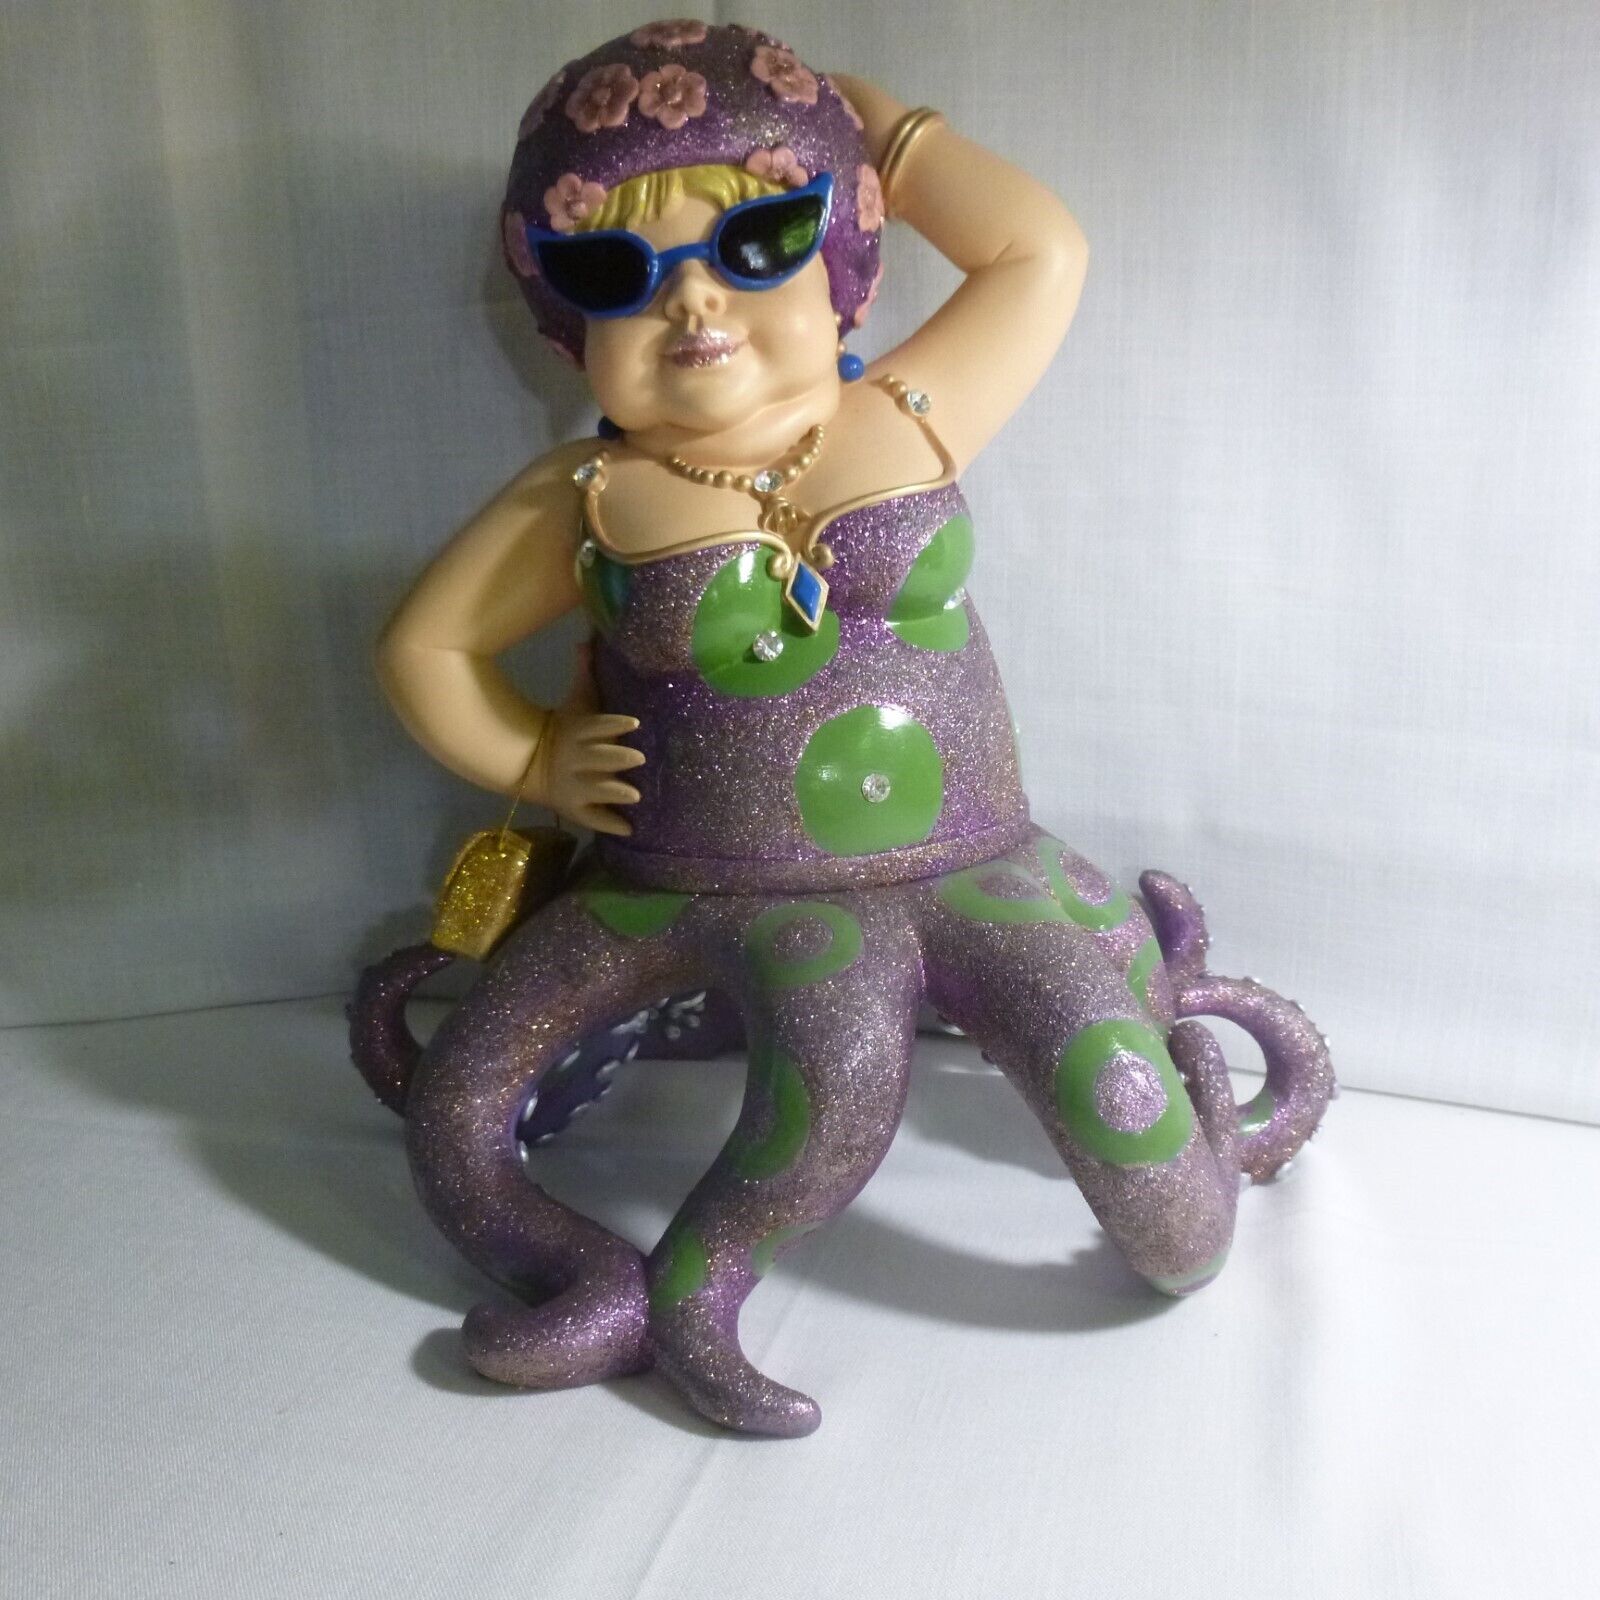 OCTOPUS WOMAN Large, Ornate, purple swim suit w lots of glitter, ready to party